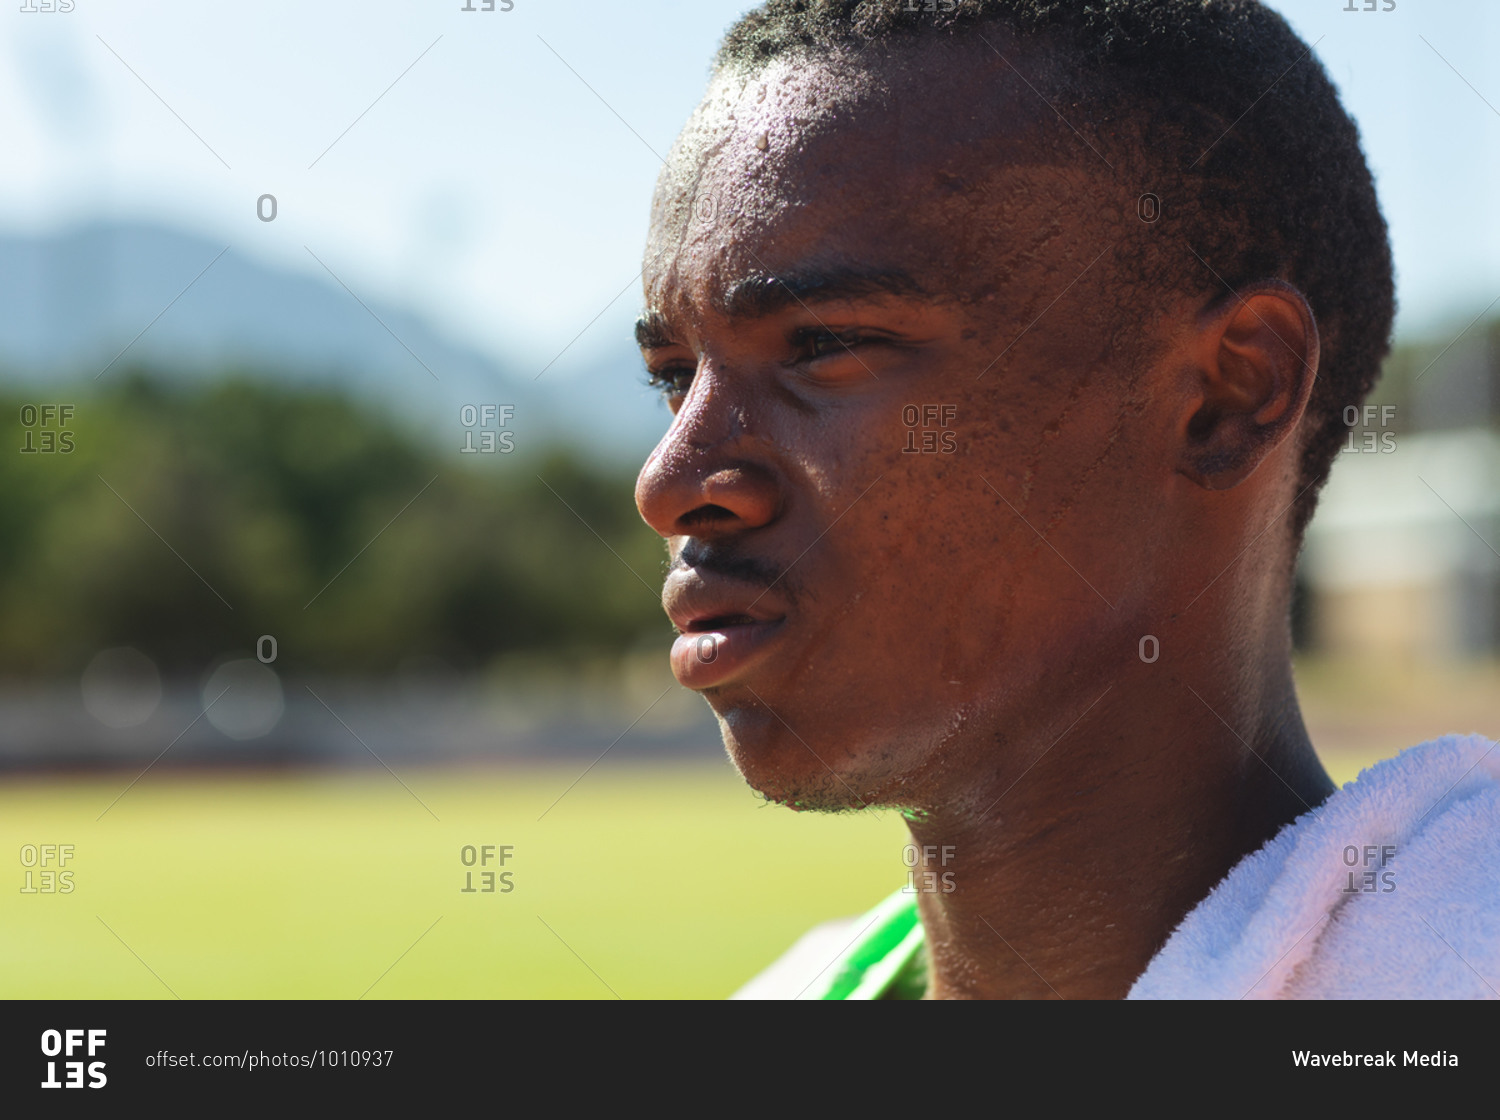 Close up of fit, focused mixed race male athlete at an outdoor sports stadium, on race track after race with towel on his shoulder. Athletics sport training.